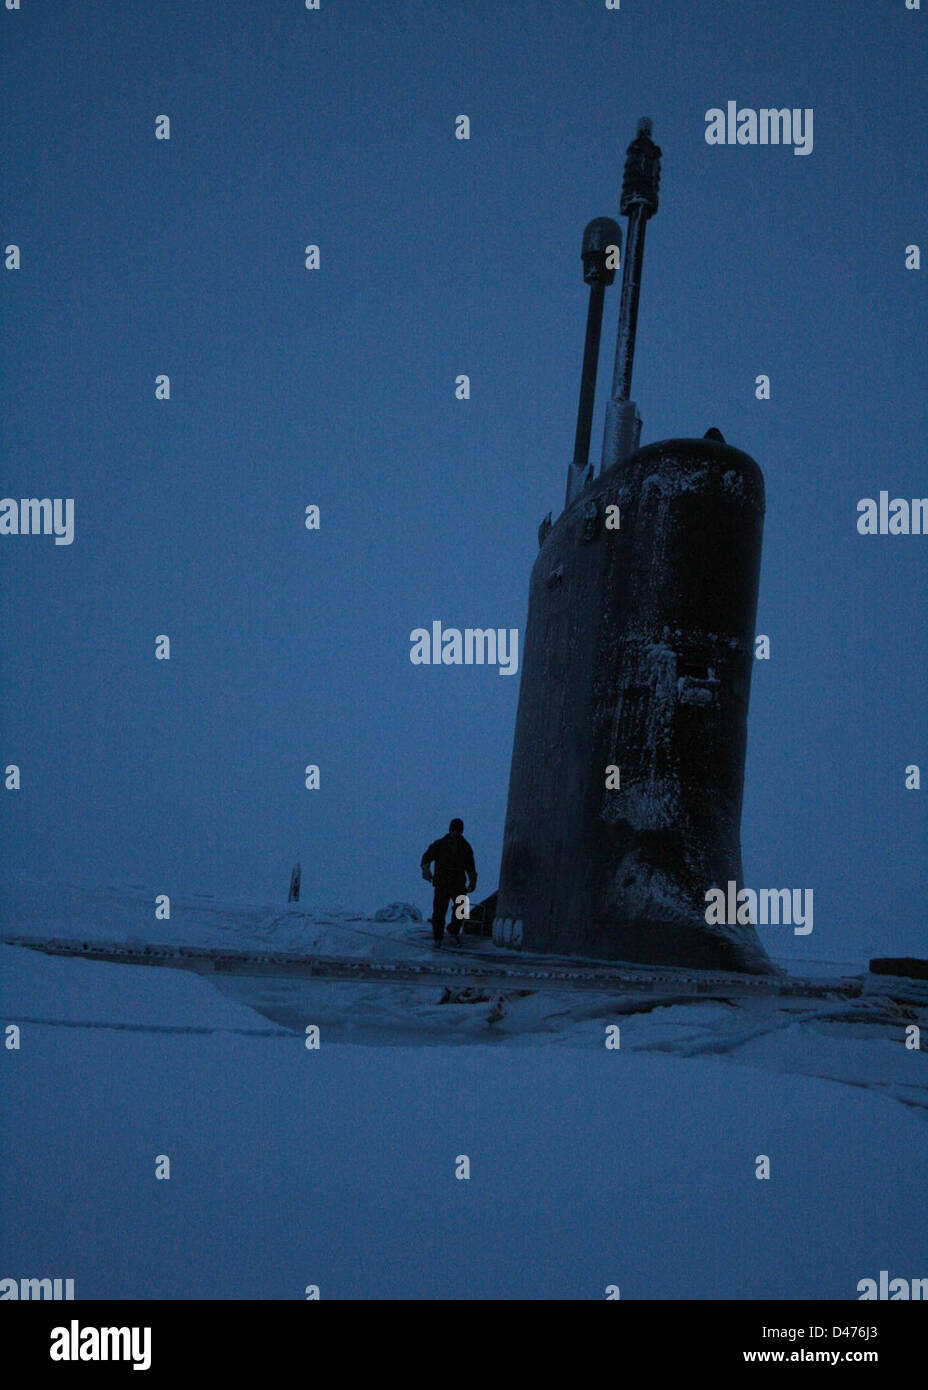 Sailor inspects deck of USS Texas after surfacing around North Pole. Stock Photo